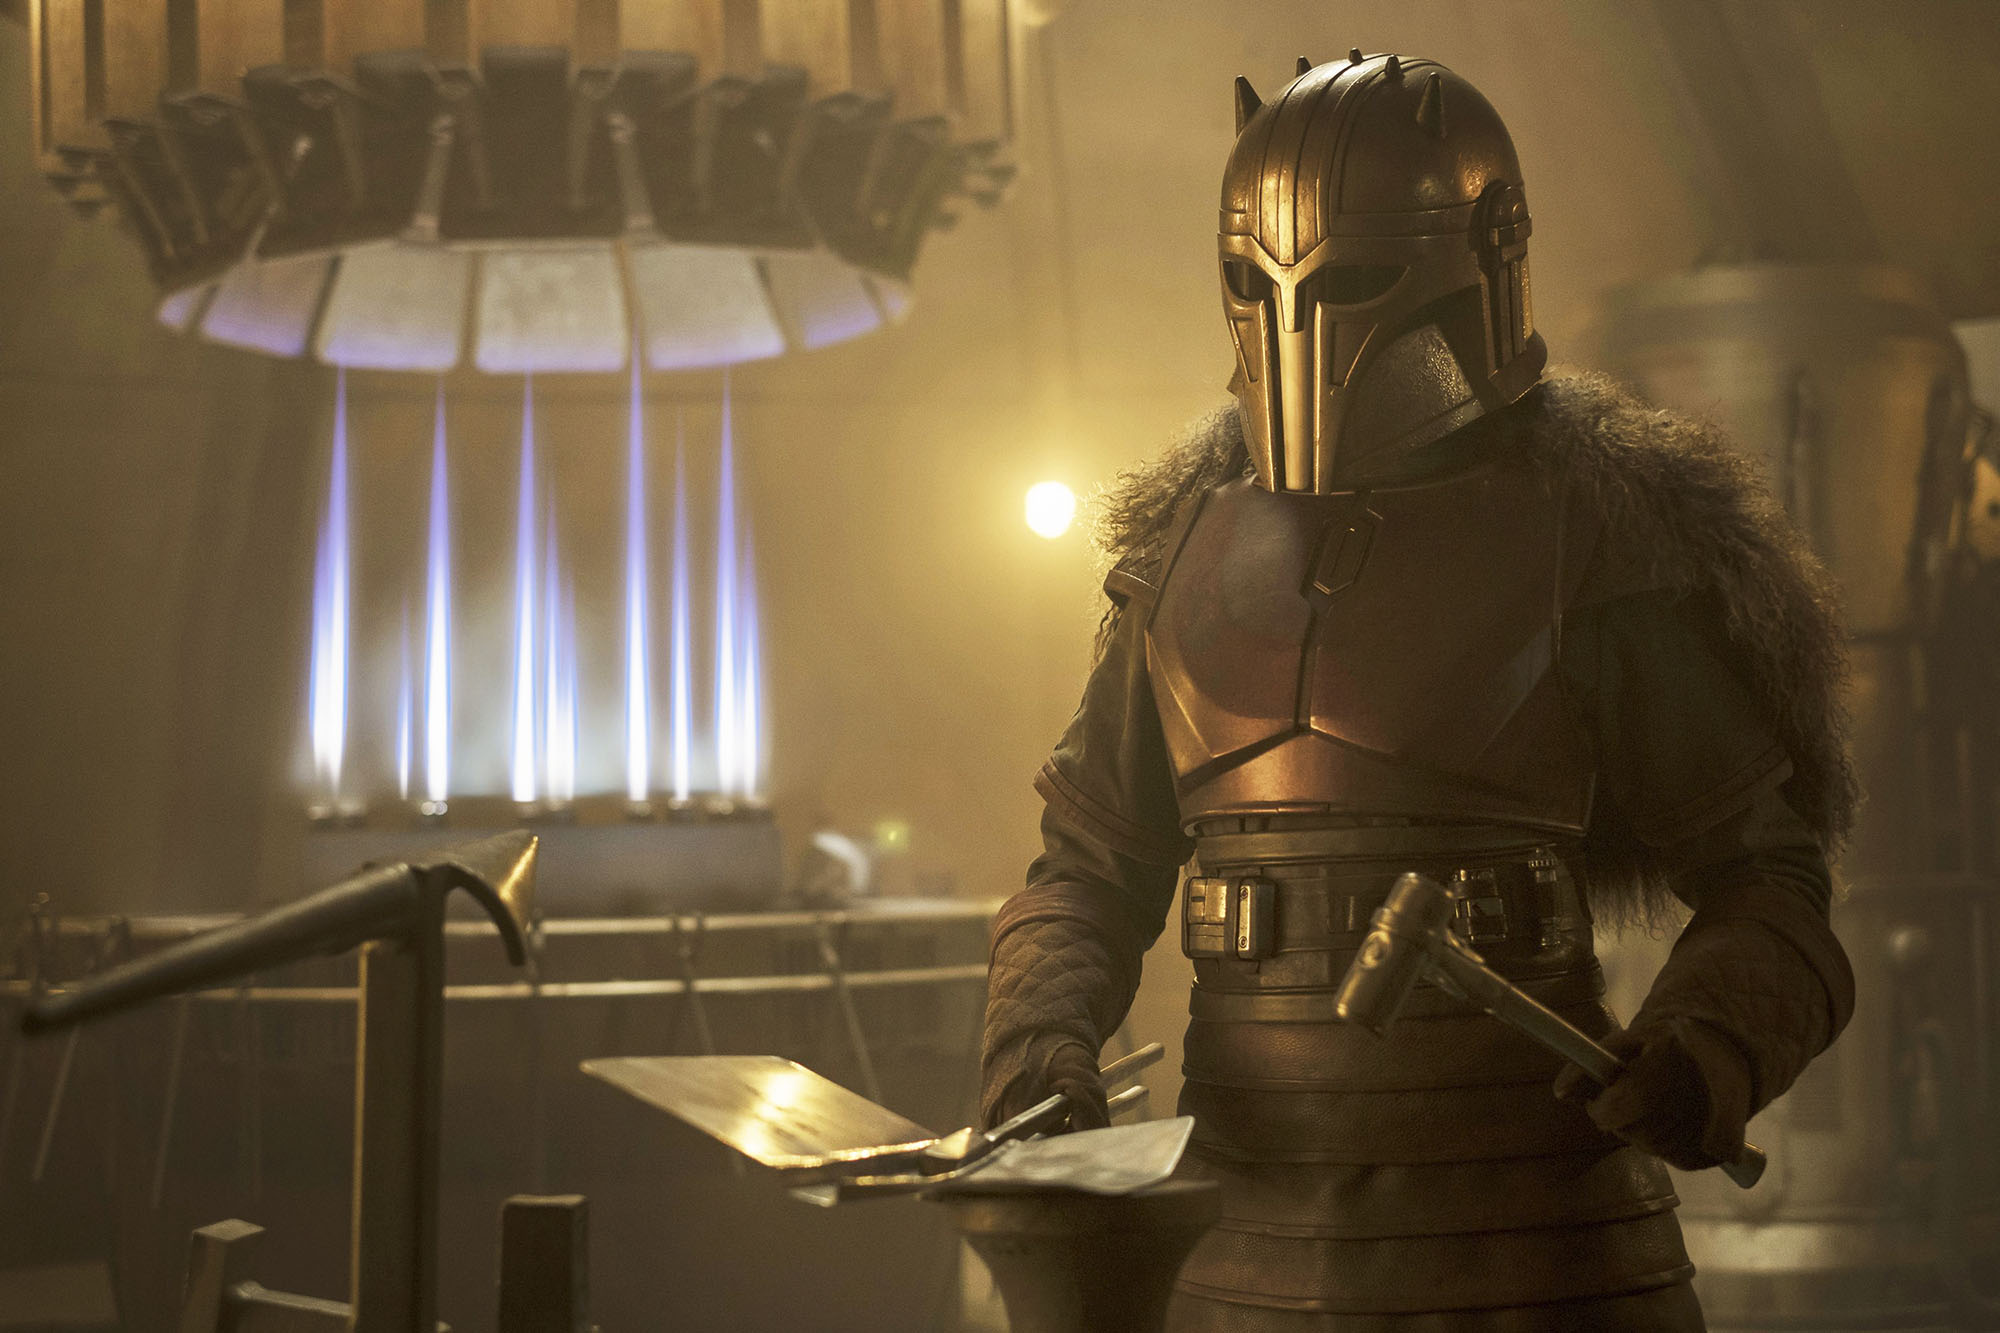 The Armorer dressed in plated metal and a full helmet in the Mandalorian